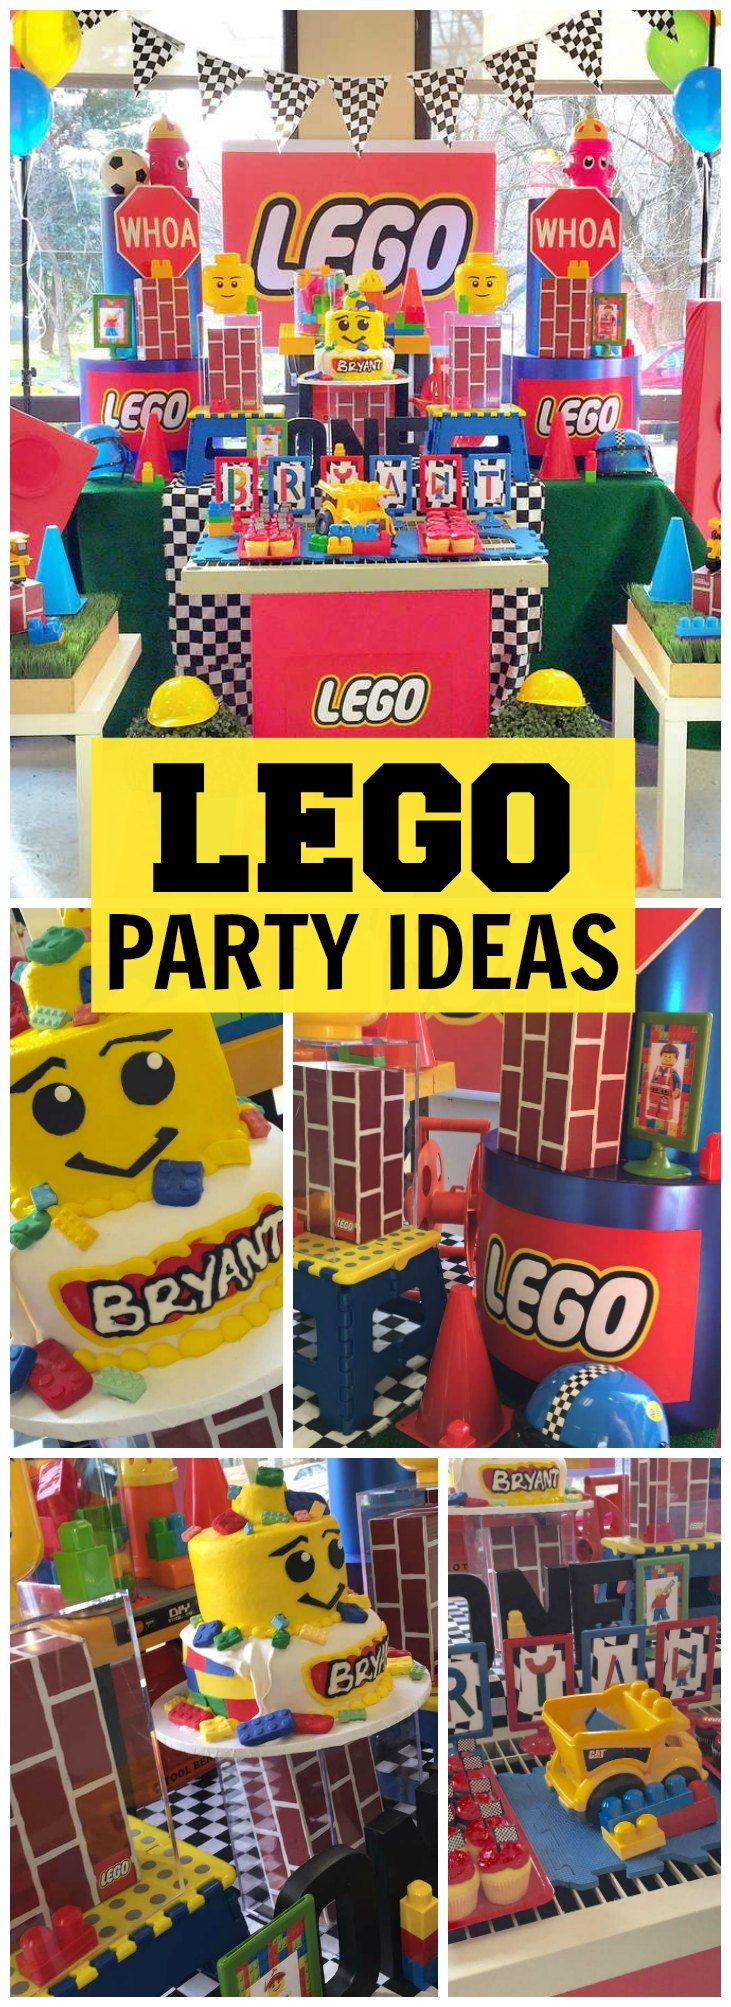 10 Year Old Boy Birthday Gift Ideas 2020
 This colorful Lego birthday party is for a one year old